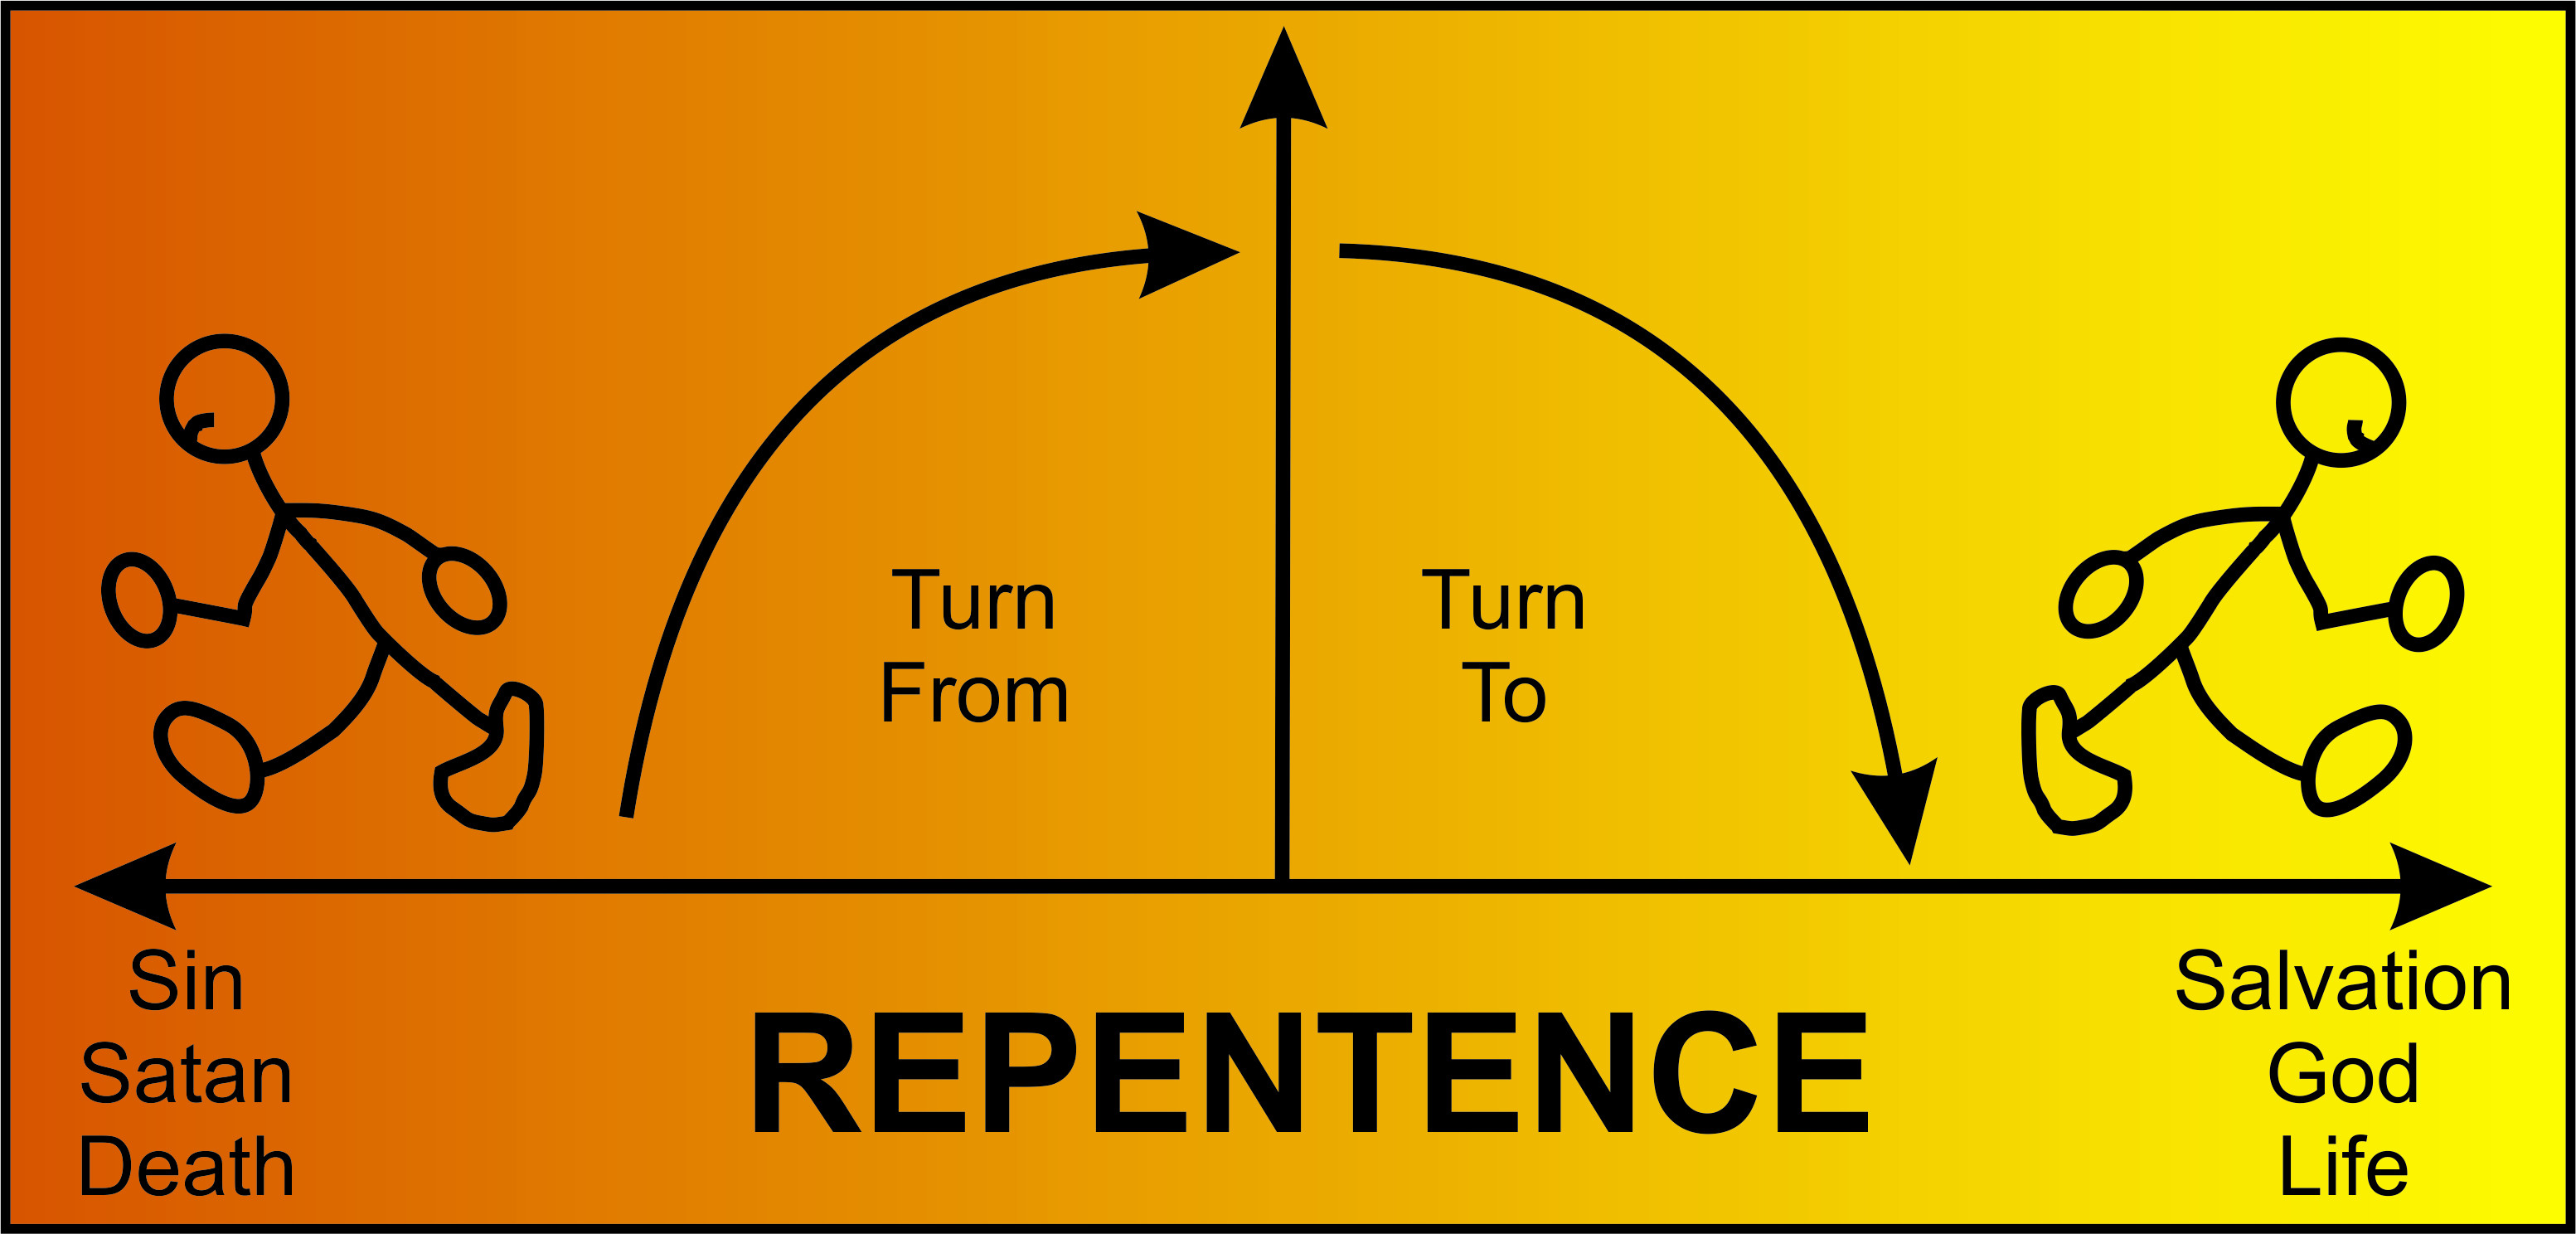 Repentance - Turn From Turn To